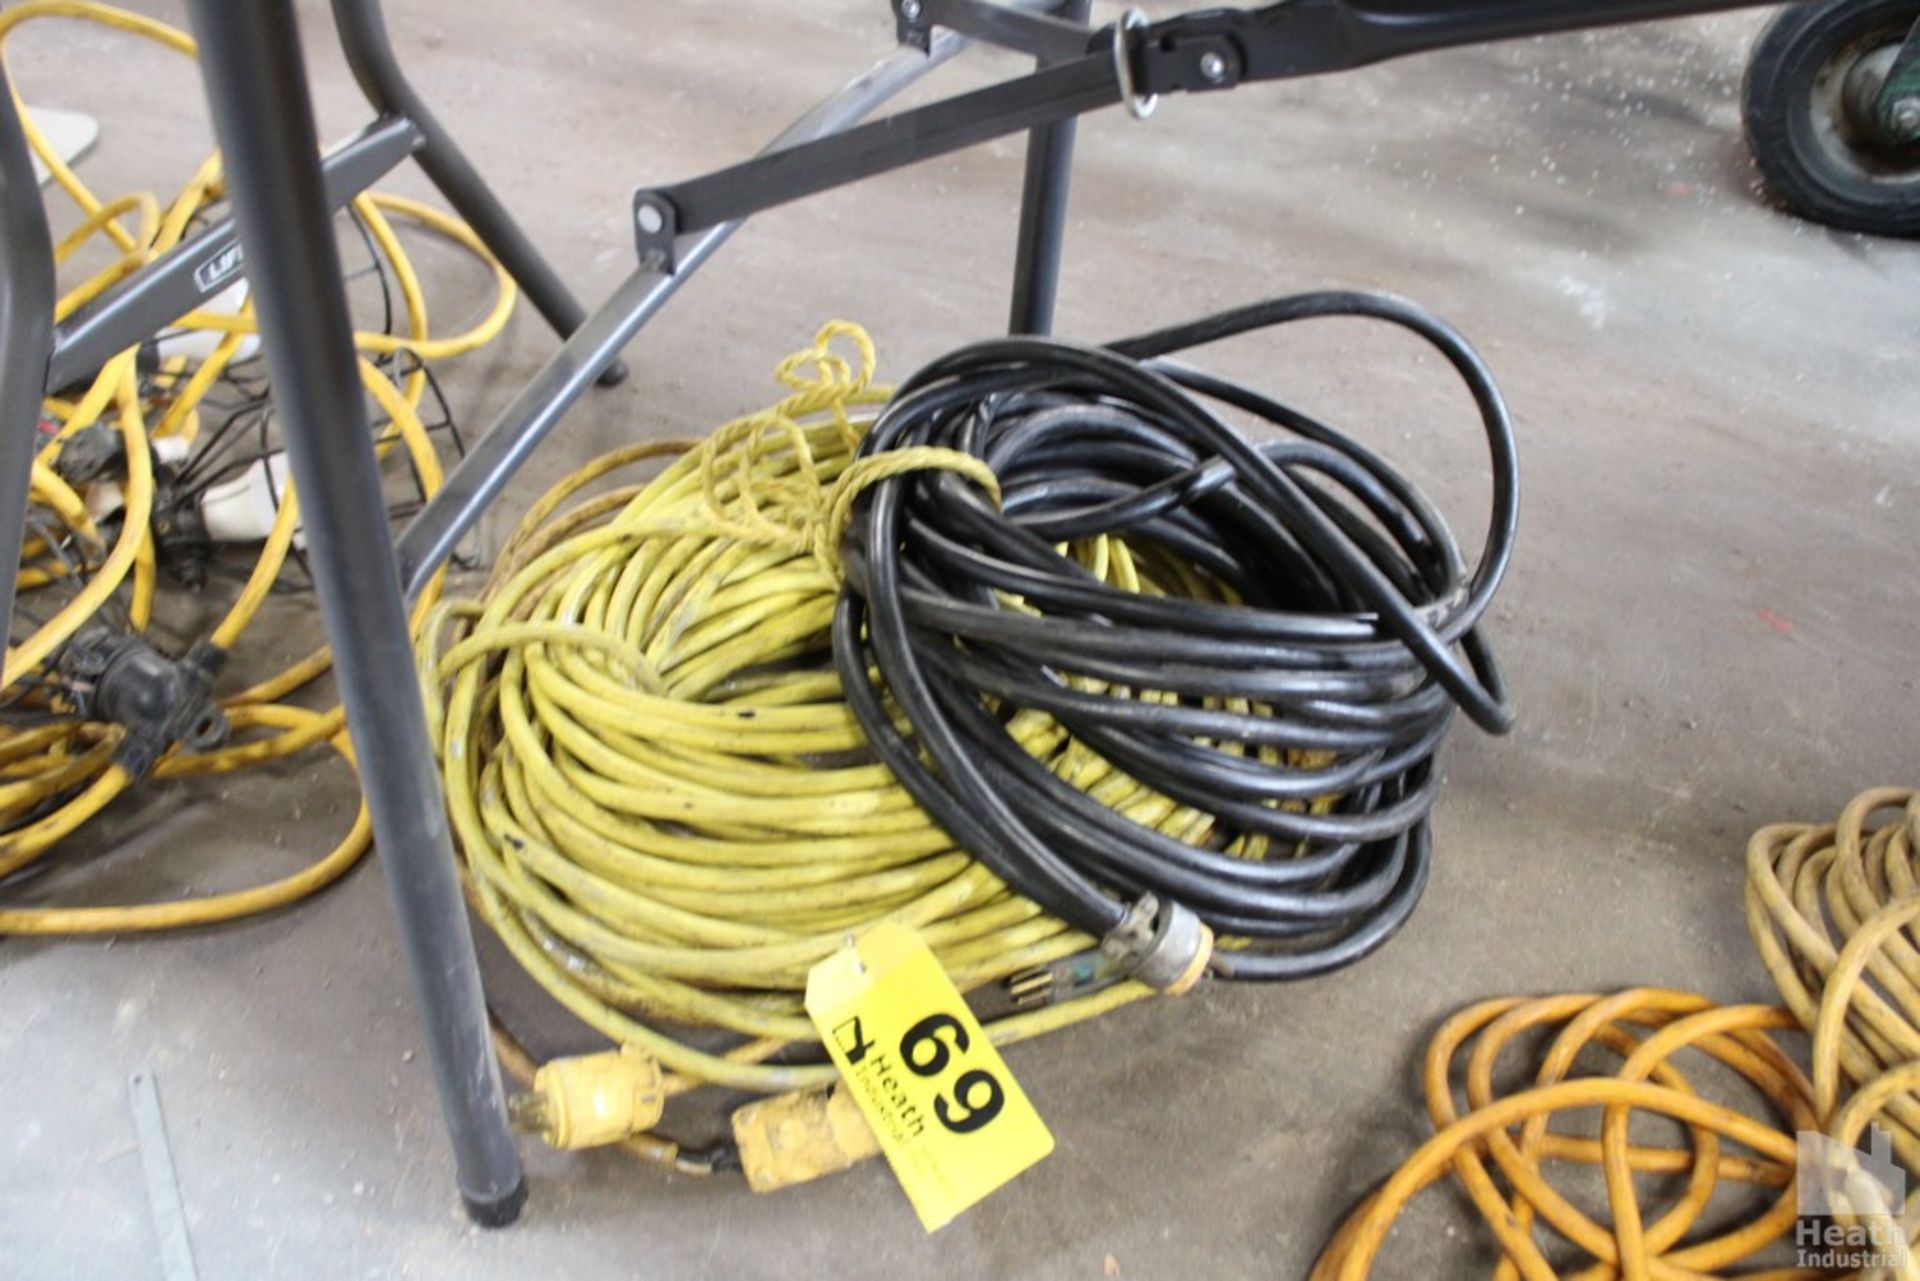 (3) HEAVY DUTY EXTENSION CORDS